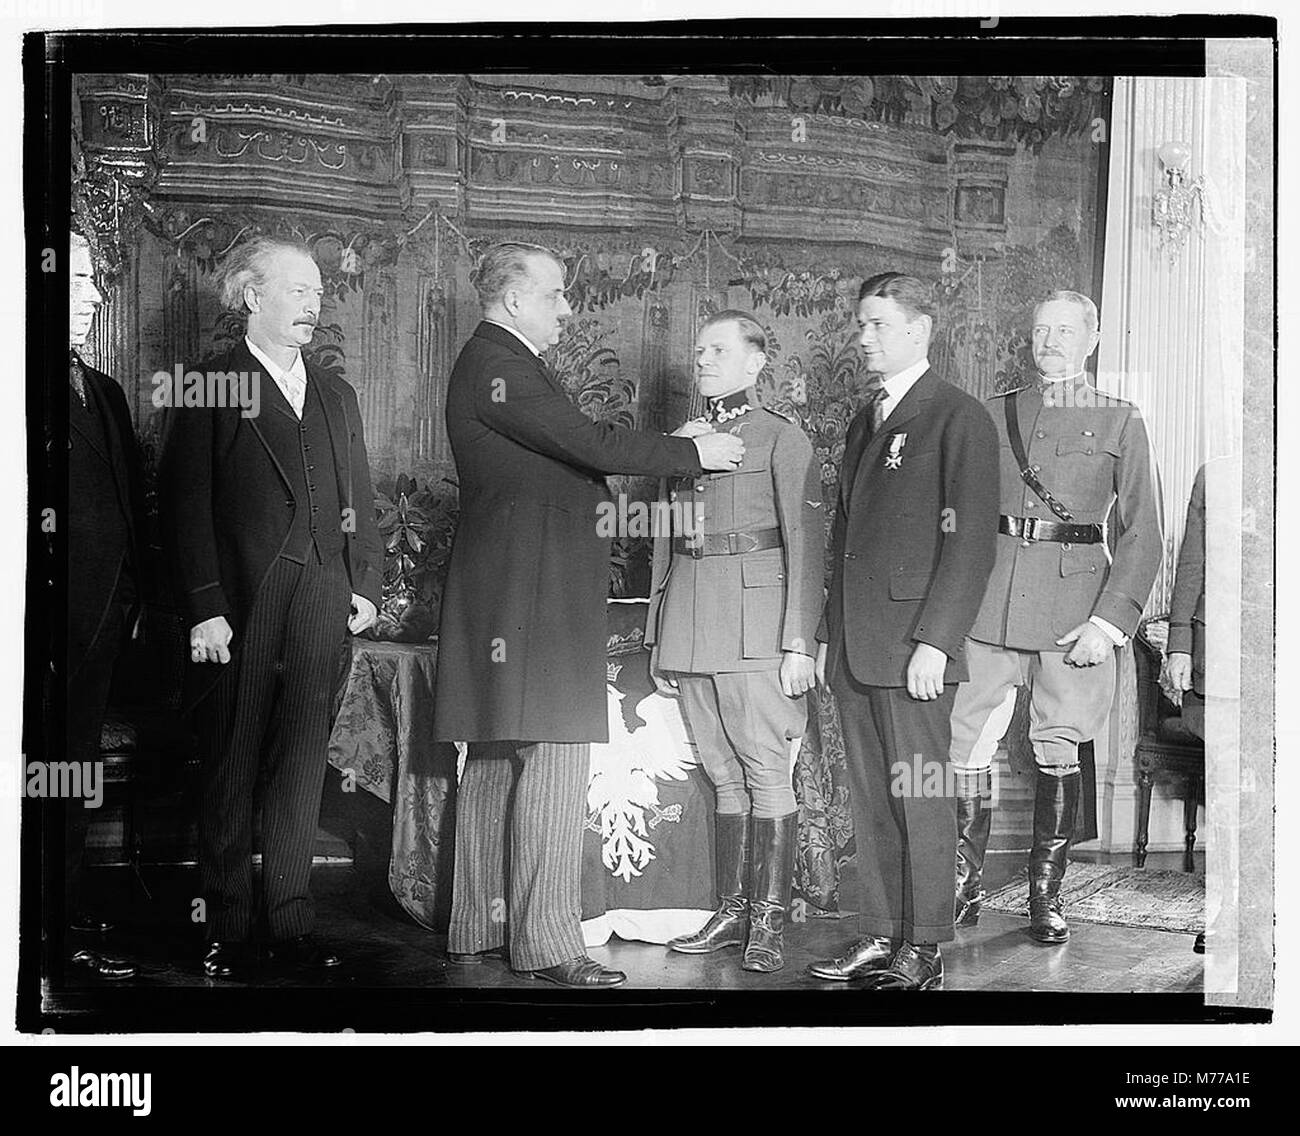 Unidentified military person receiving honor), 3-14-21 LOC npcc.03712 Stock Photo